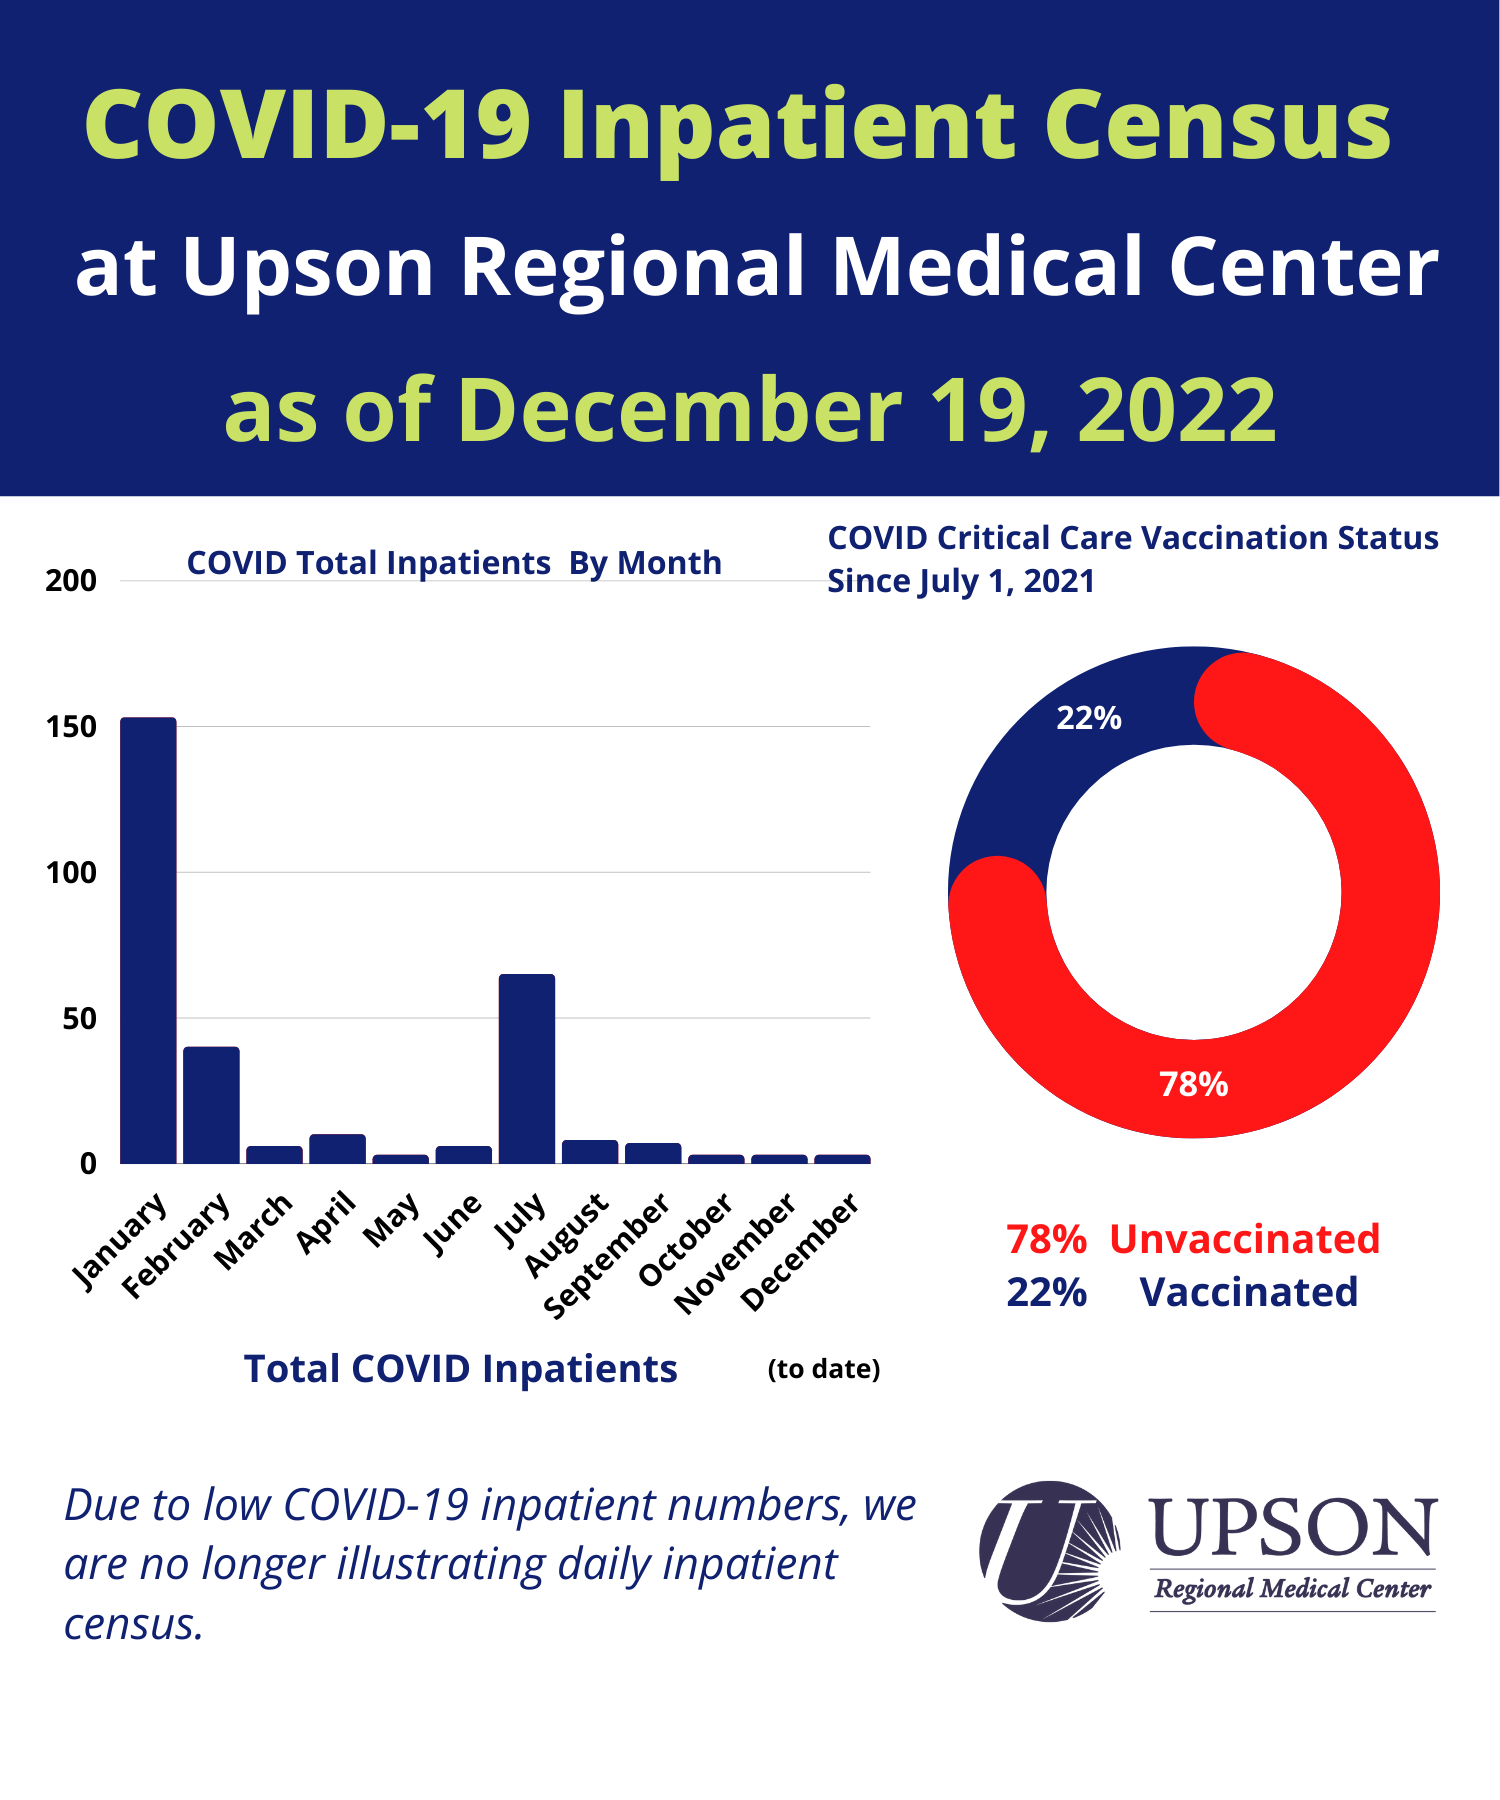 Photo for URMC COVID-19 inpatient status as of December 19, 2022.